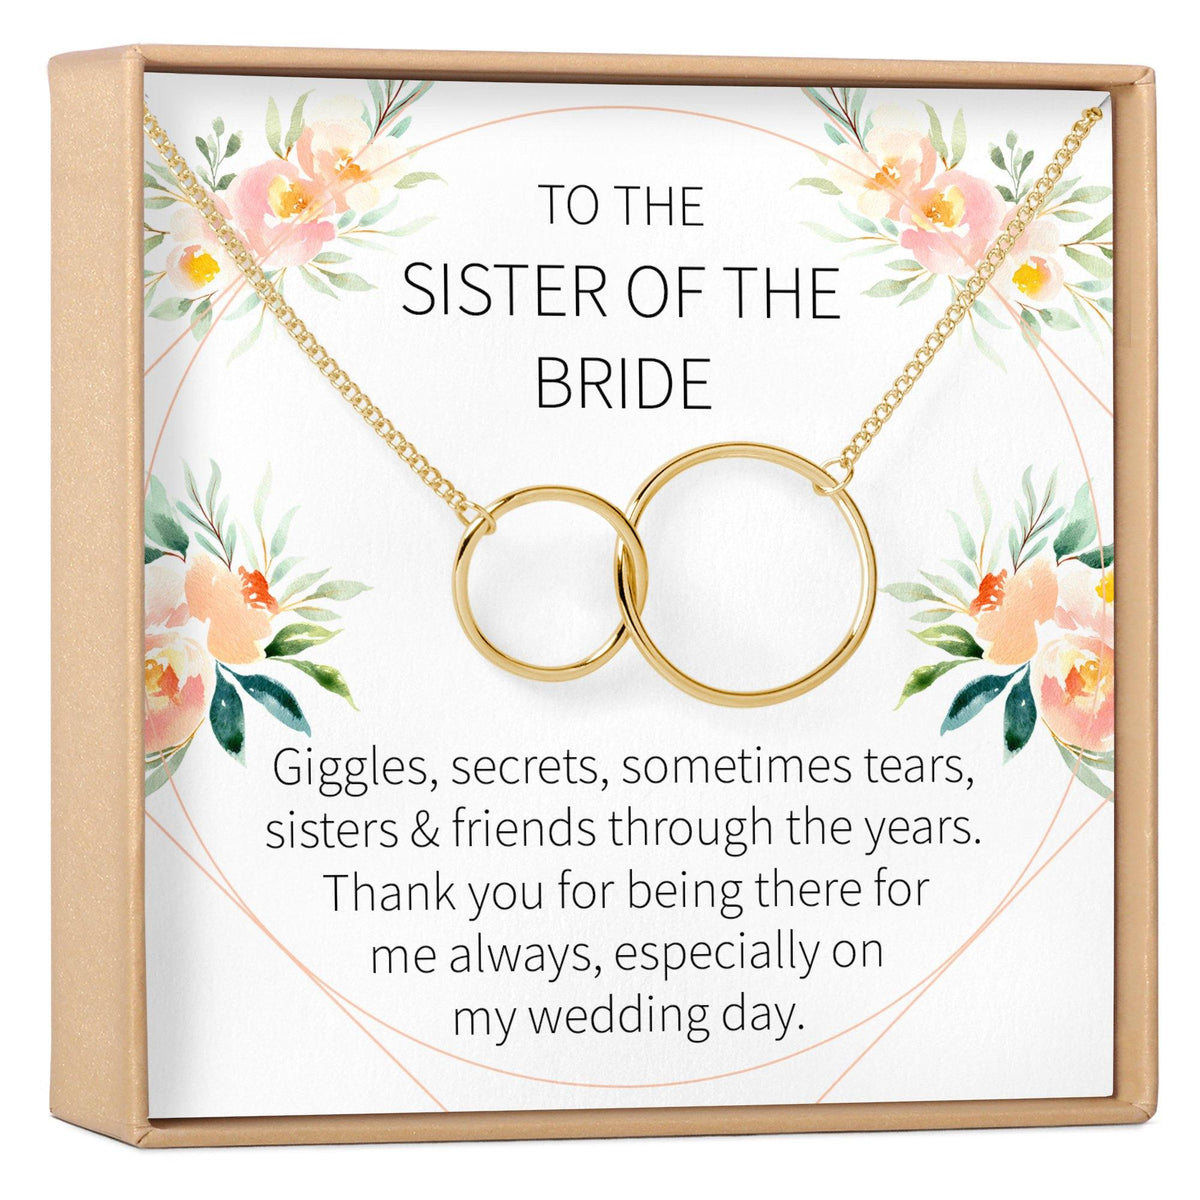 FARMHOWESS Engagement Gift for Bride to Be - The One Where He India | Ubuy